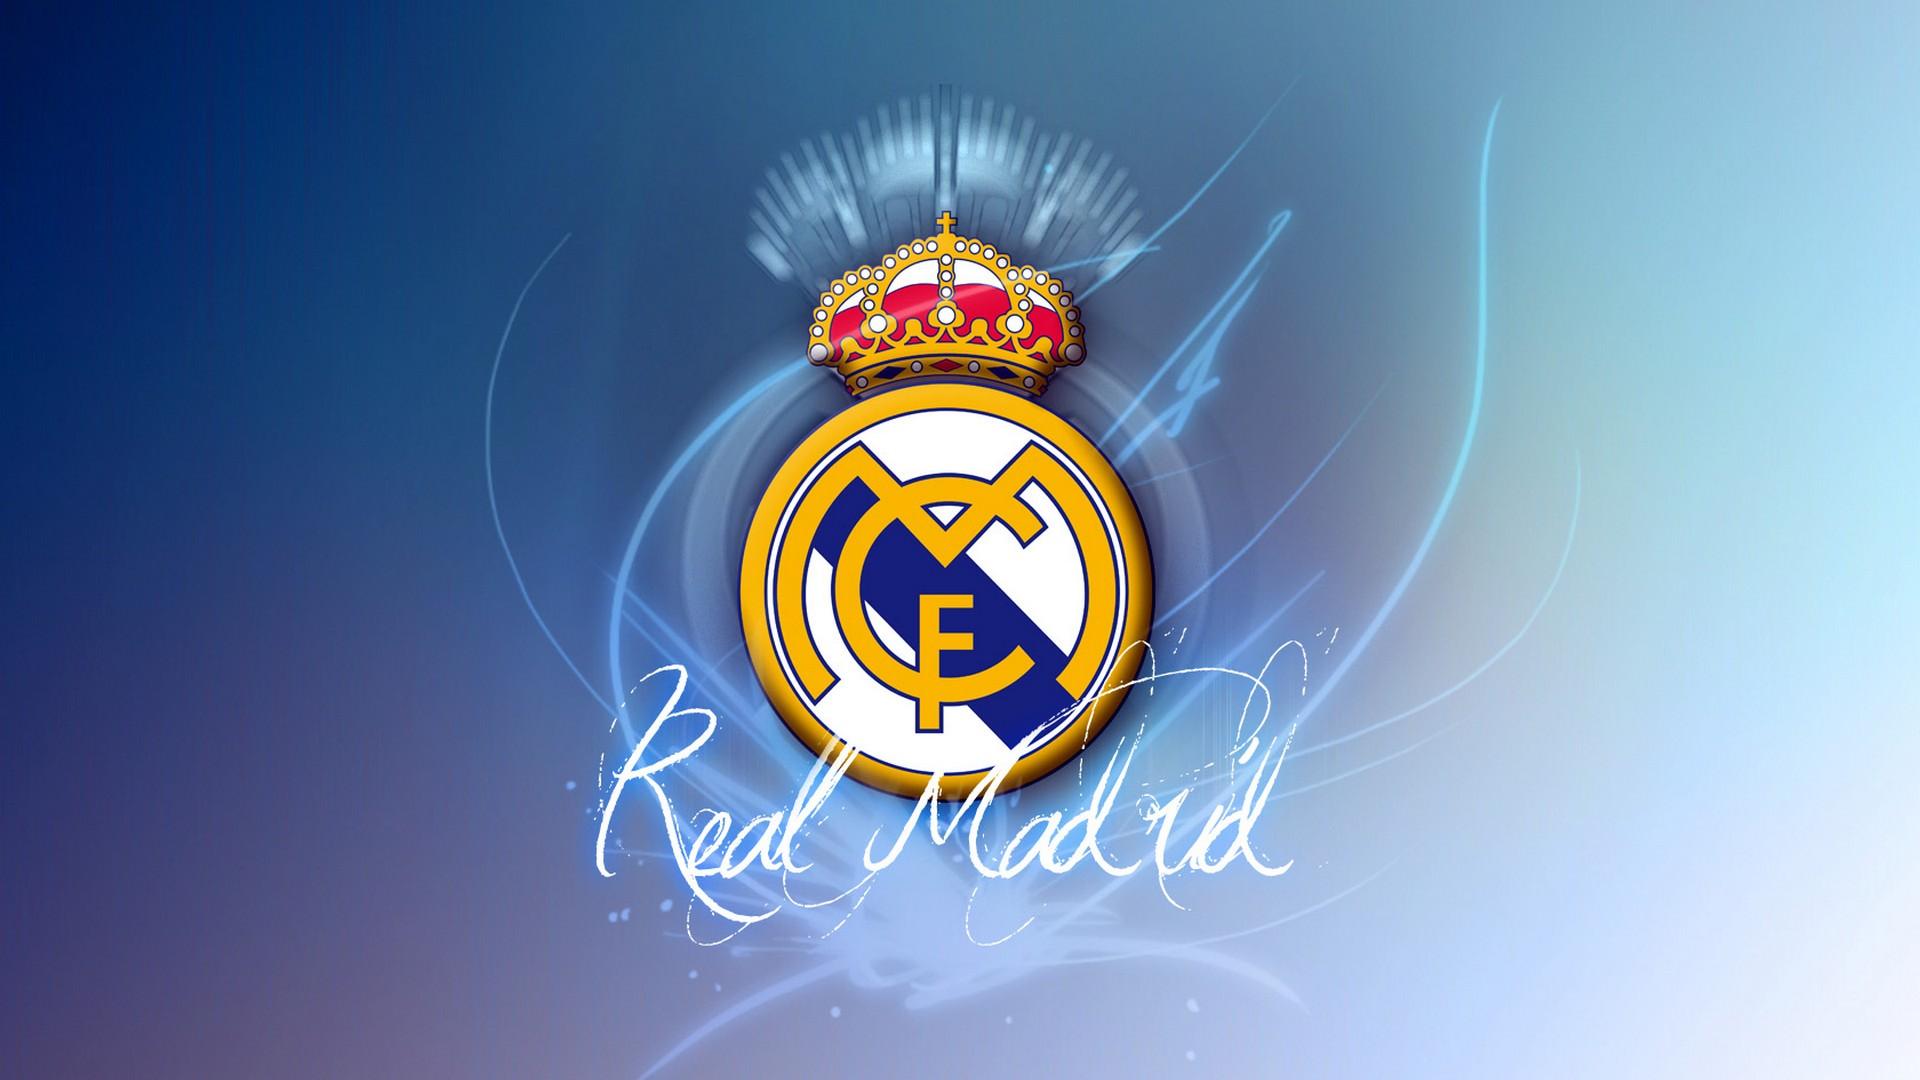 Real Madrid HD Wallpapers High Quality 